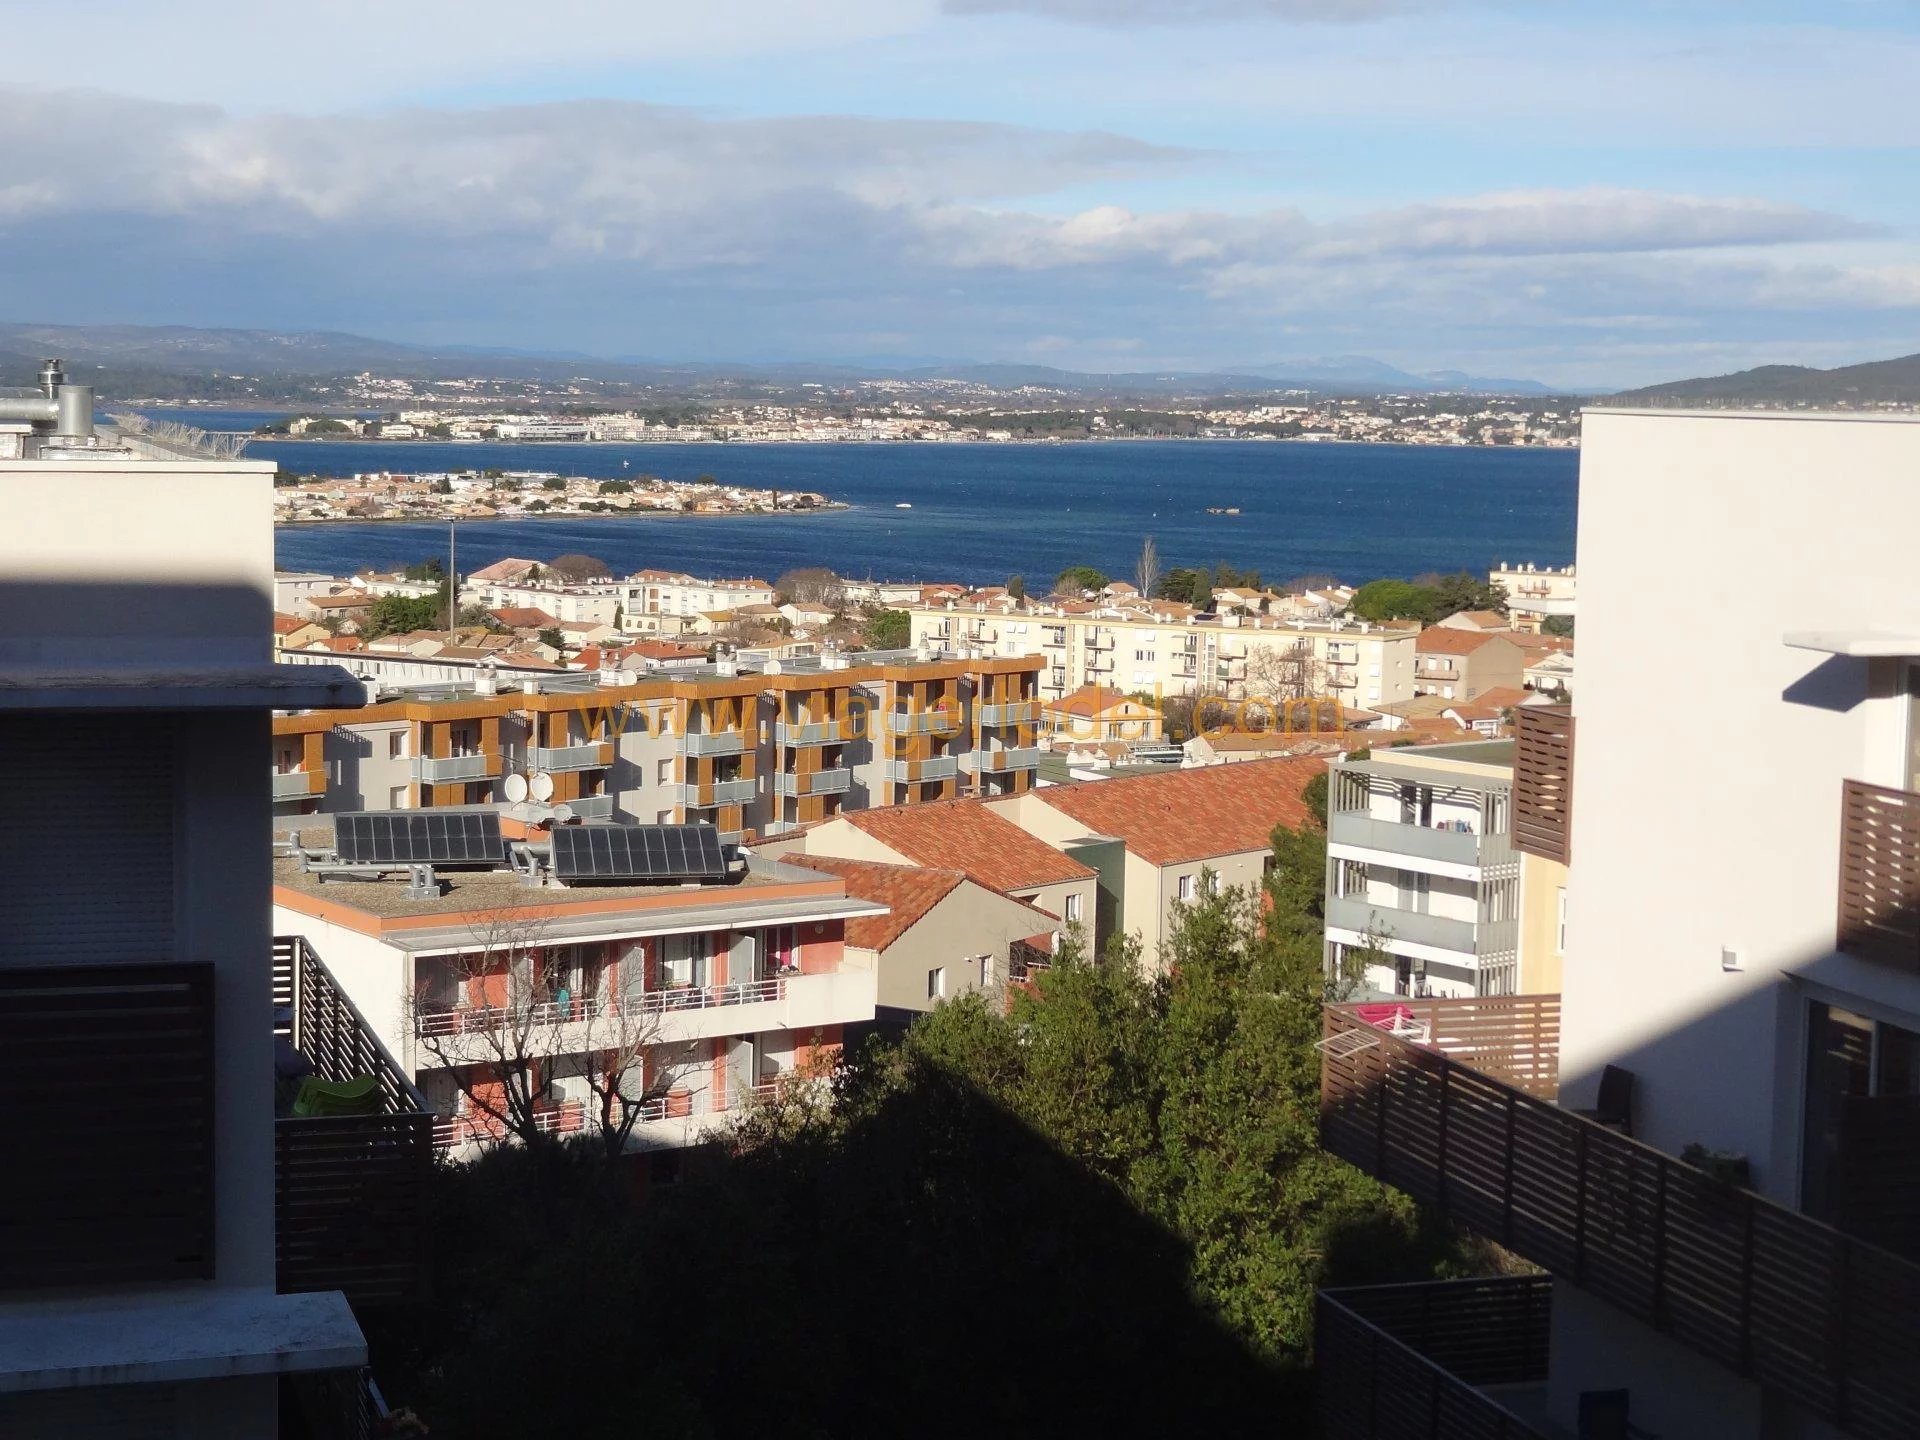 SOLD - Réf. 9371 - OCCUPIED LIFE ANNUITY - SETE (34)